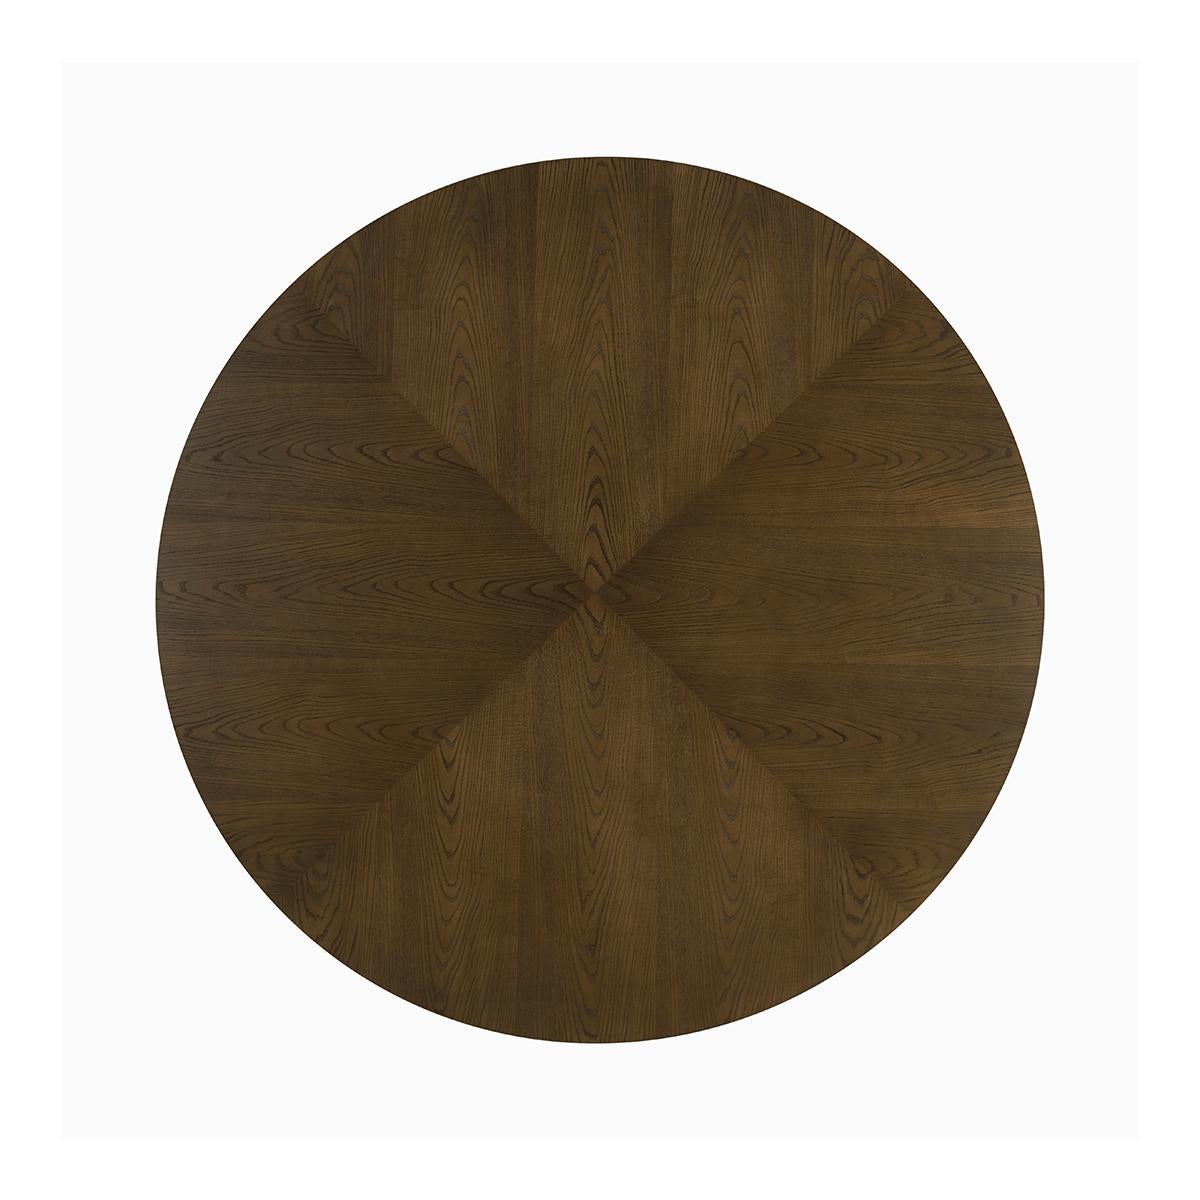 Modern round dark ash dining table, made of figured cathedral ash in choice of Earth finish

Dimensions: 64